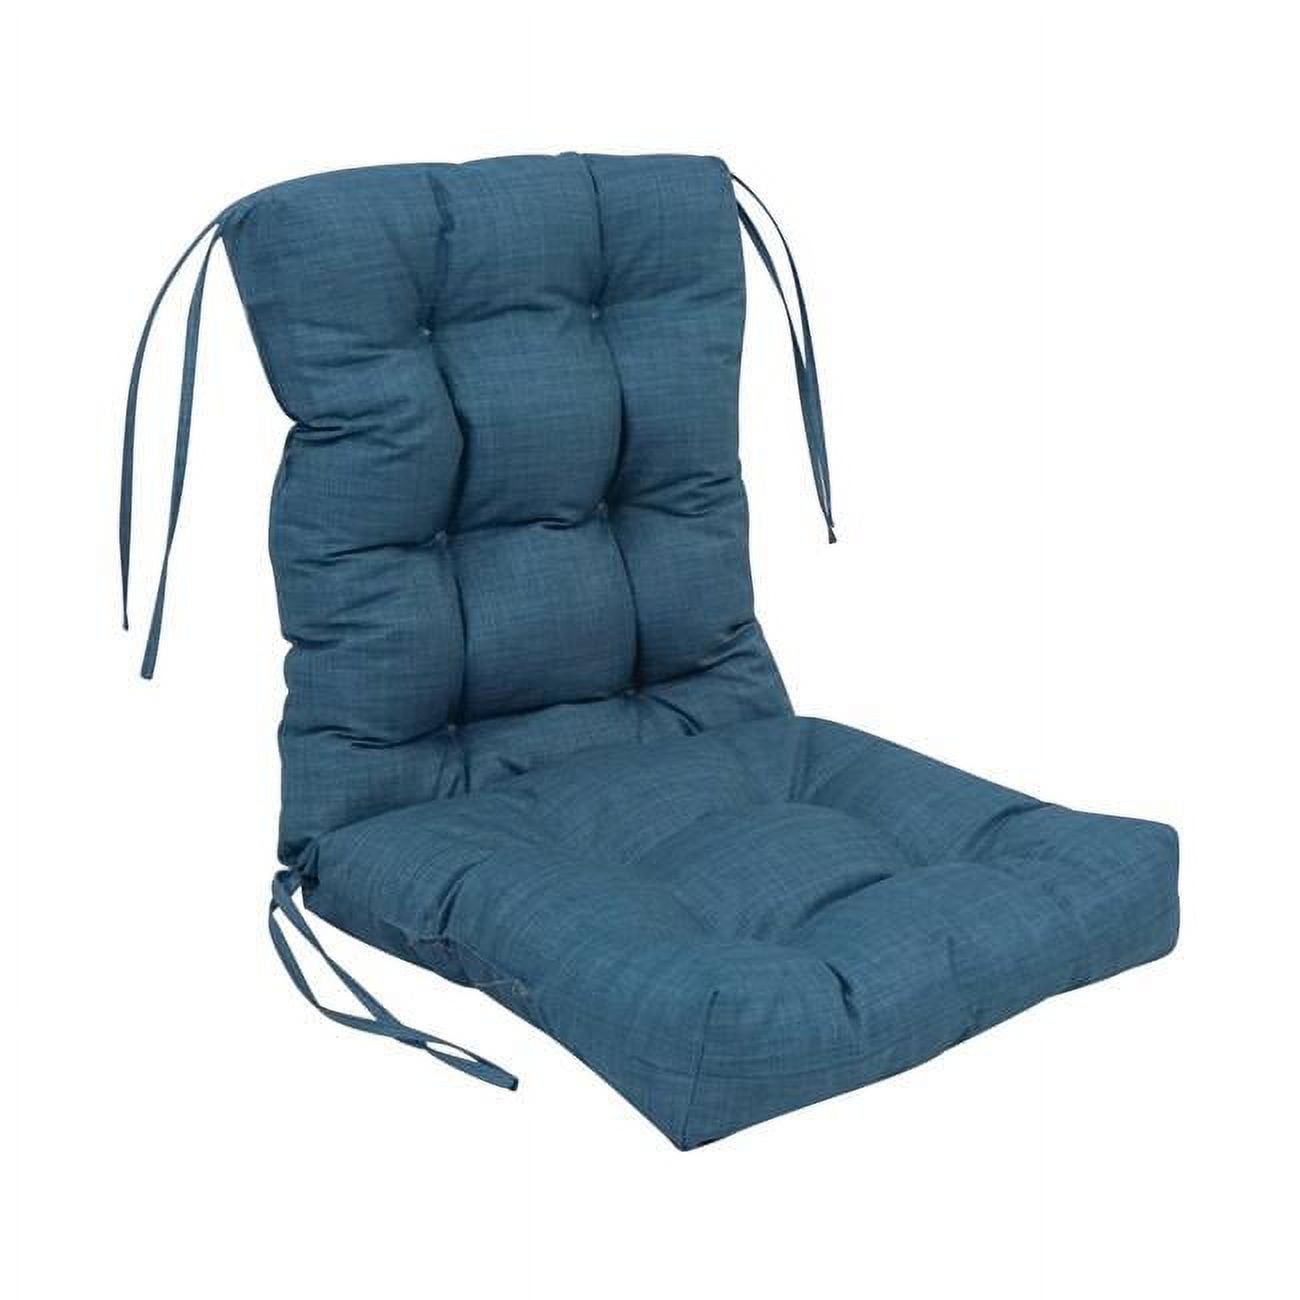 Sea Blue Tufted Outdoor Chair Cushion in Spun Polyester, 18" x 38"